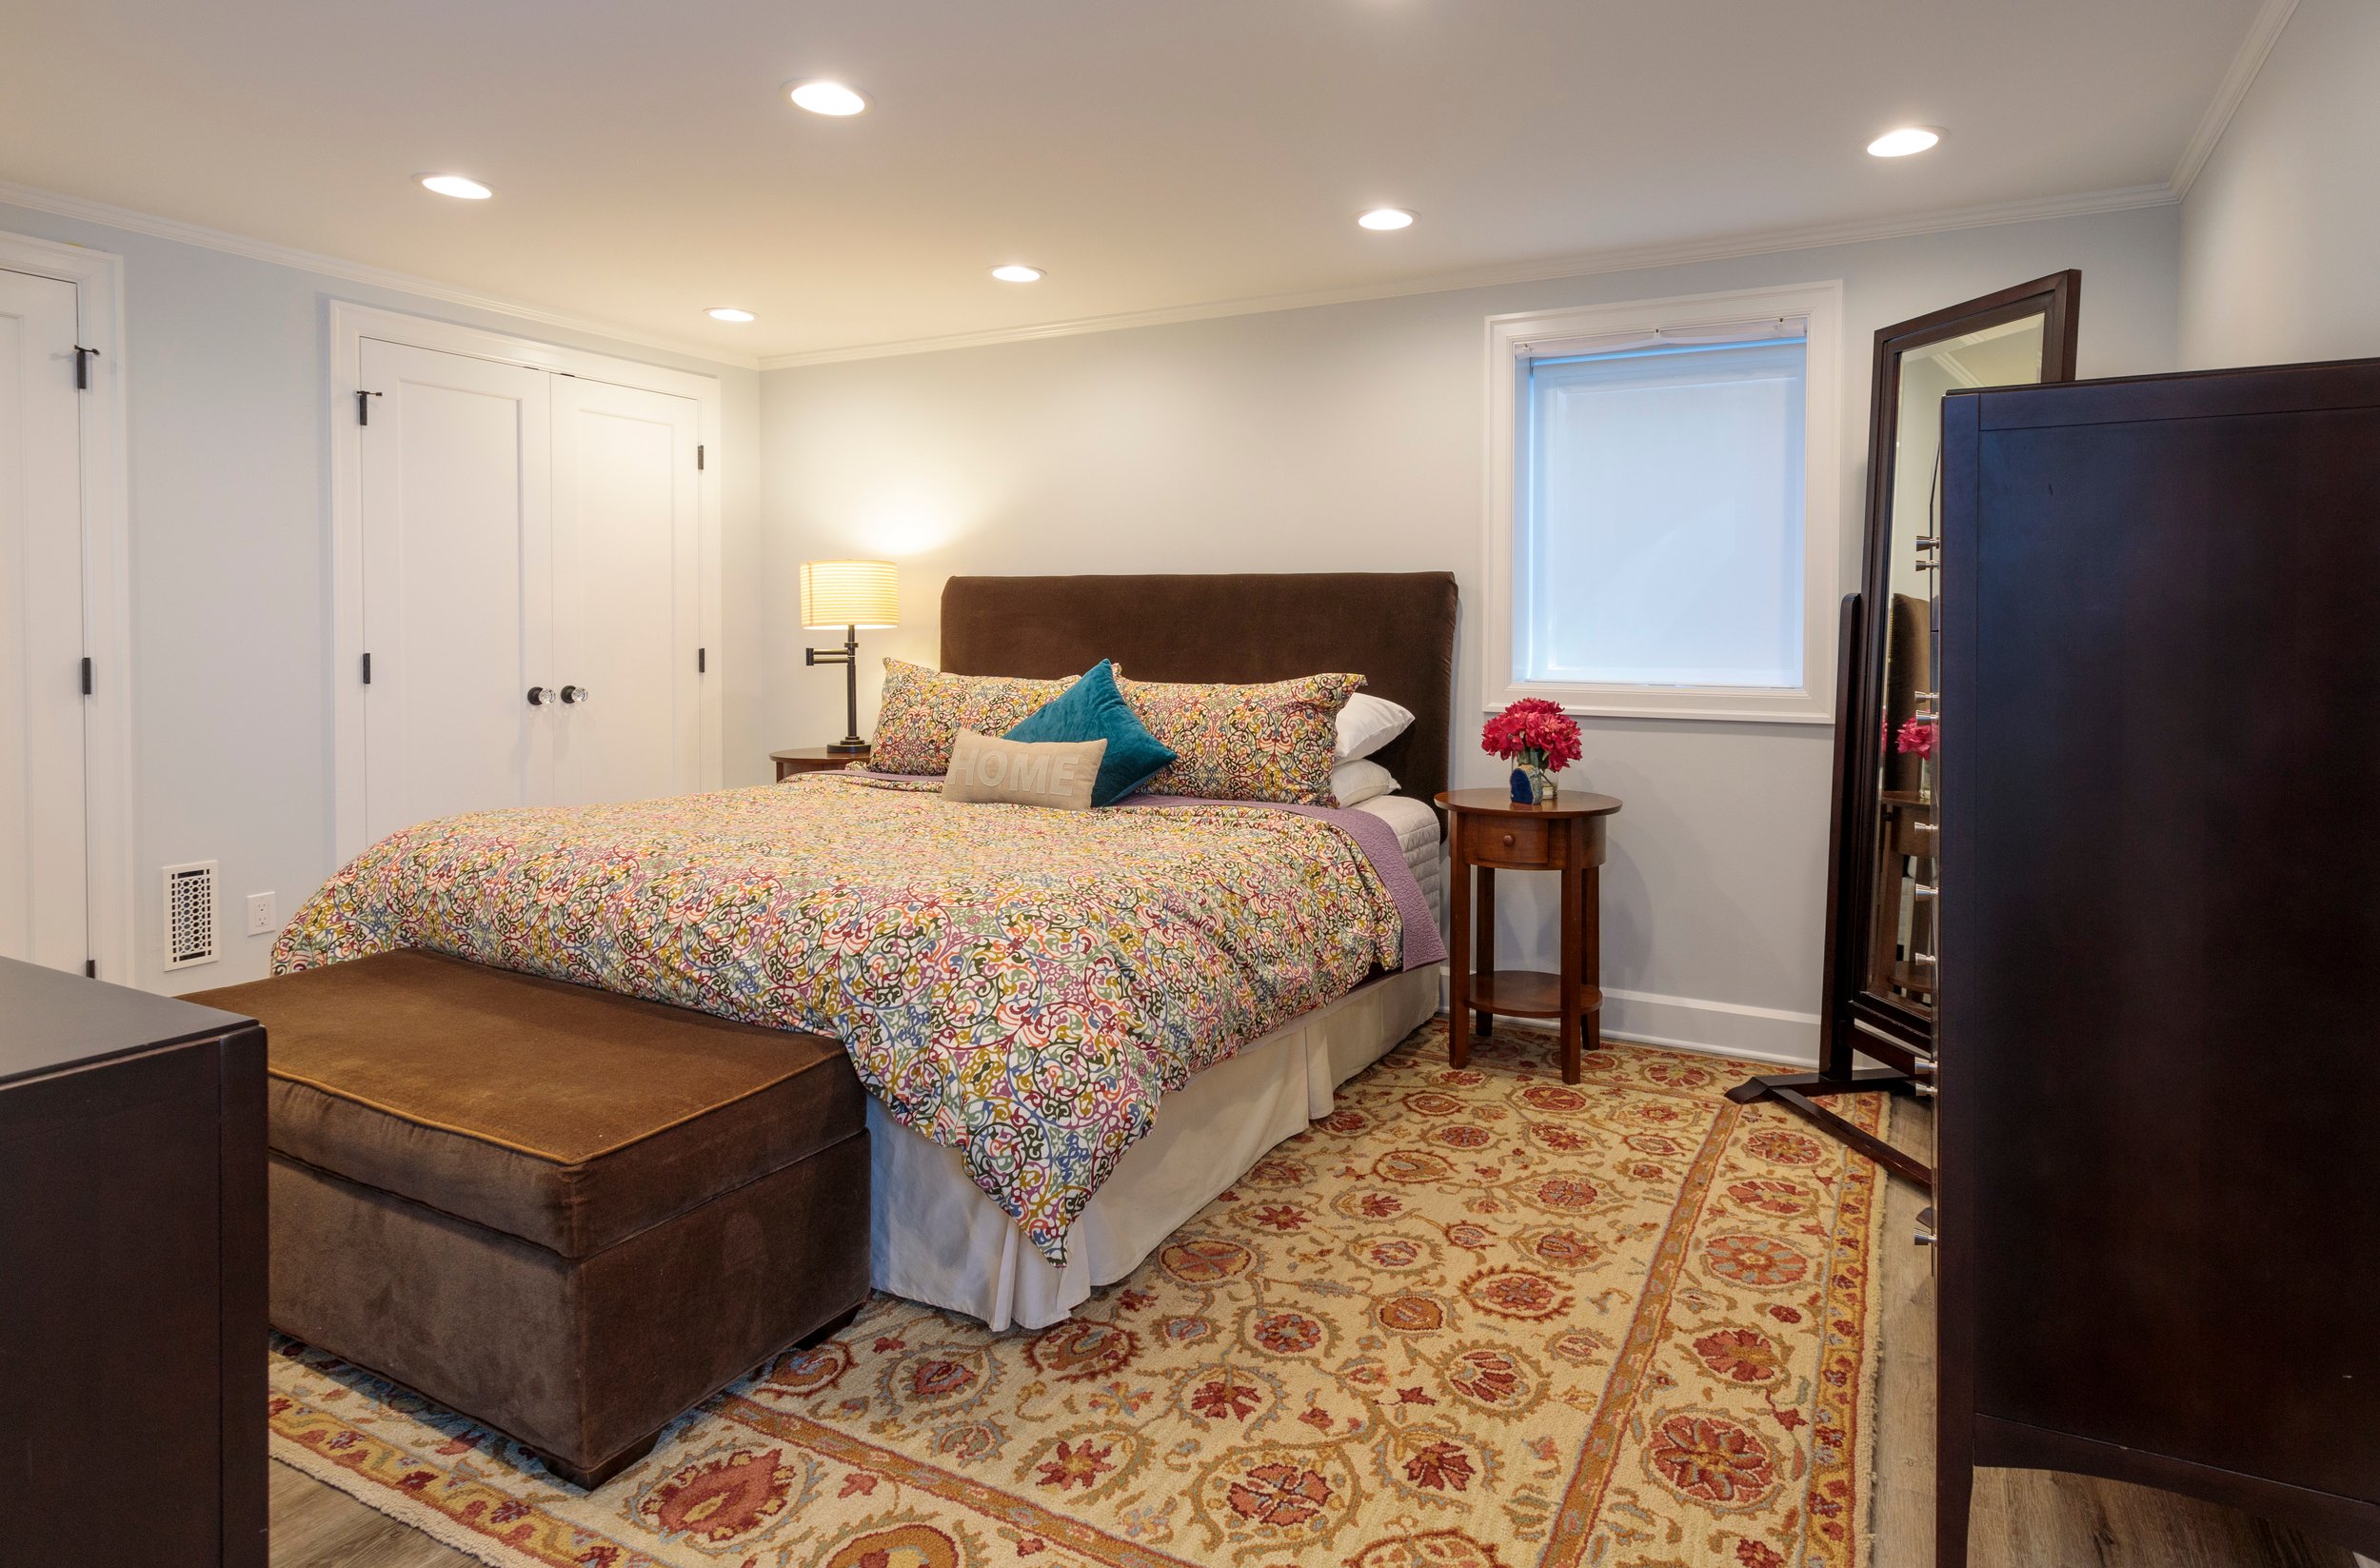 Basement: The ‘Big Dig’ allowed for a large and airy guest bedroom.